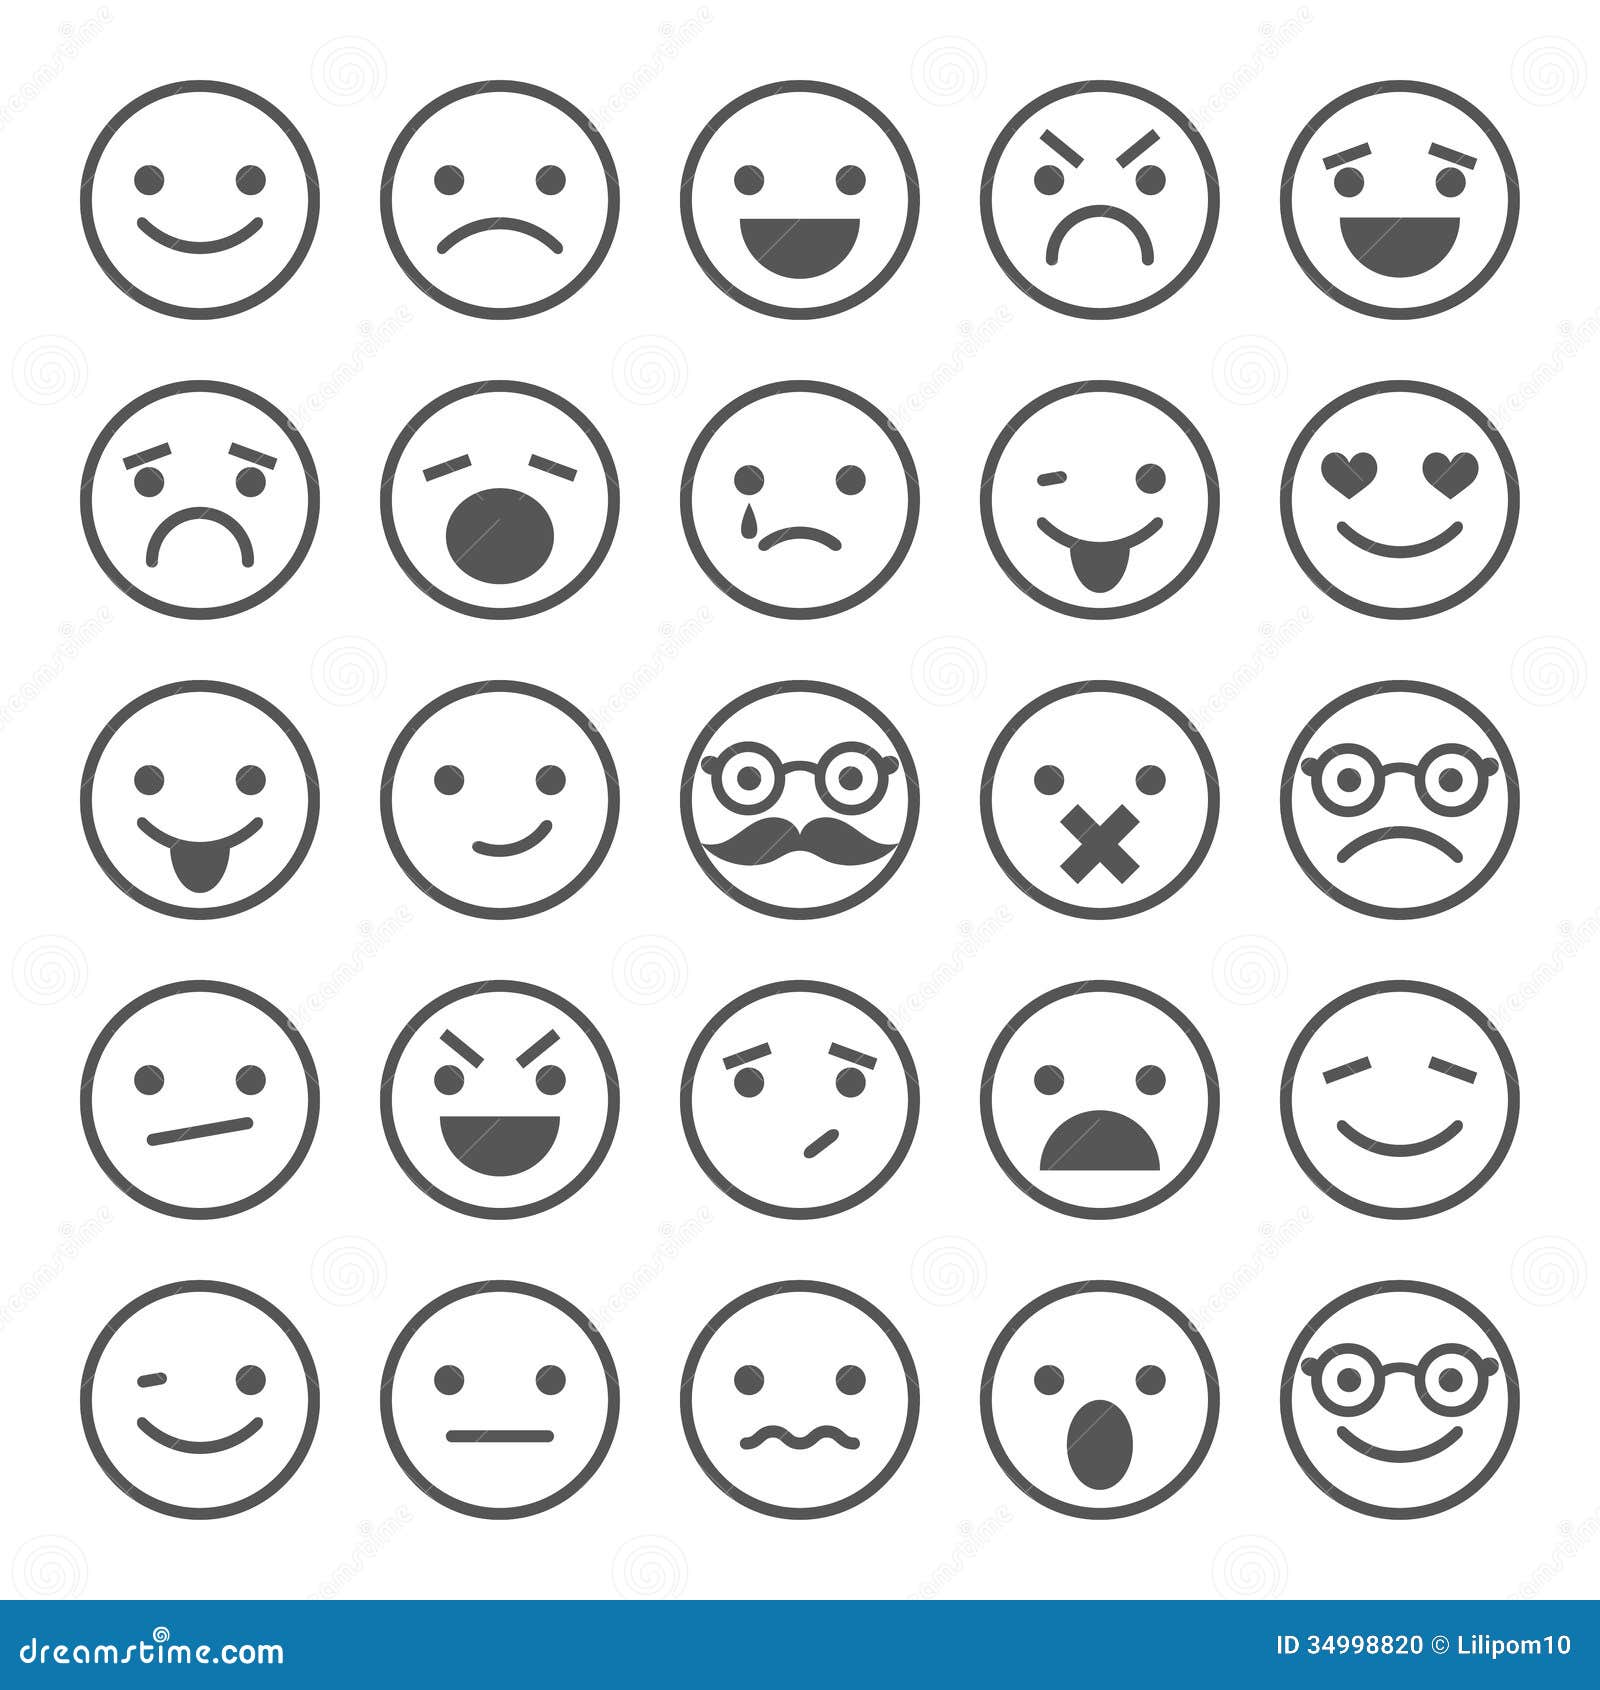 emotions clipart black and white - photo #43